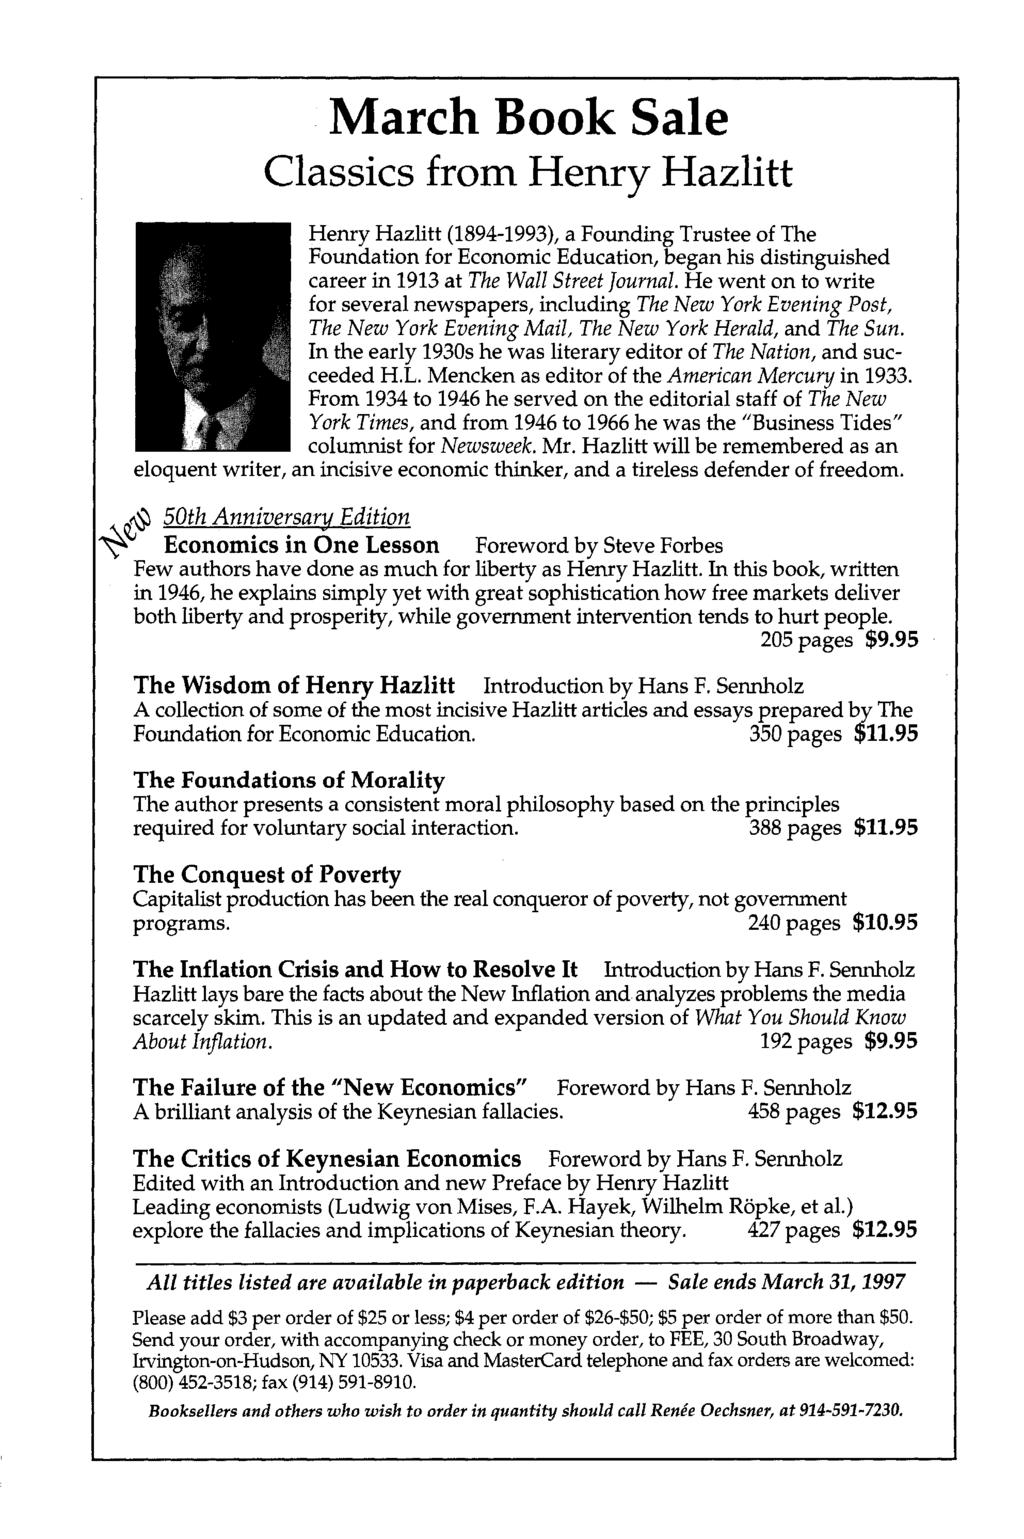 March Book Sale Classics from Henry Hazlitt Henry Hazlitt (1894-1993), a Founding Trustee of The Foundation for Economic Education, began his distinguished careerin 1913 at The Wall Street Journal.